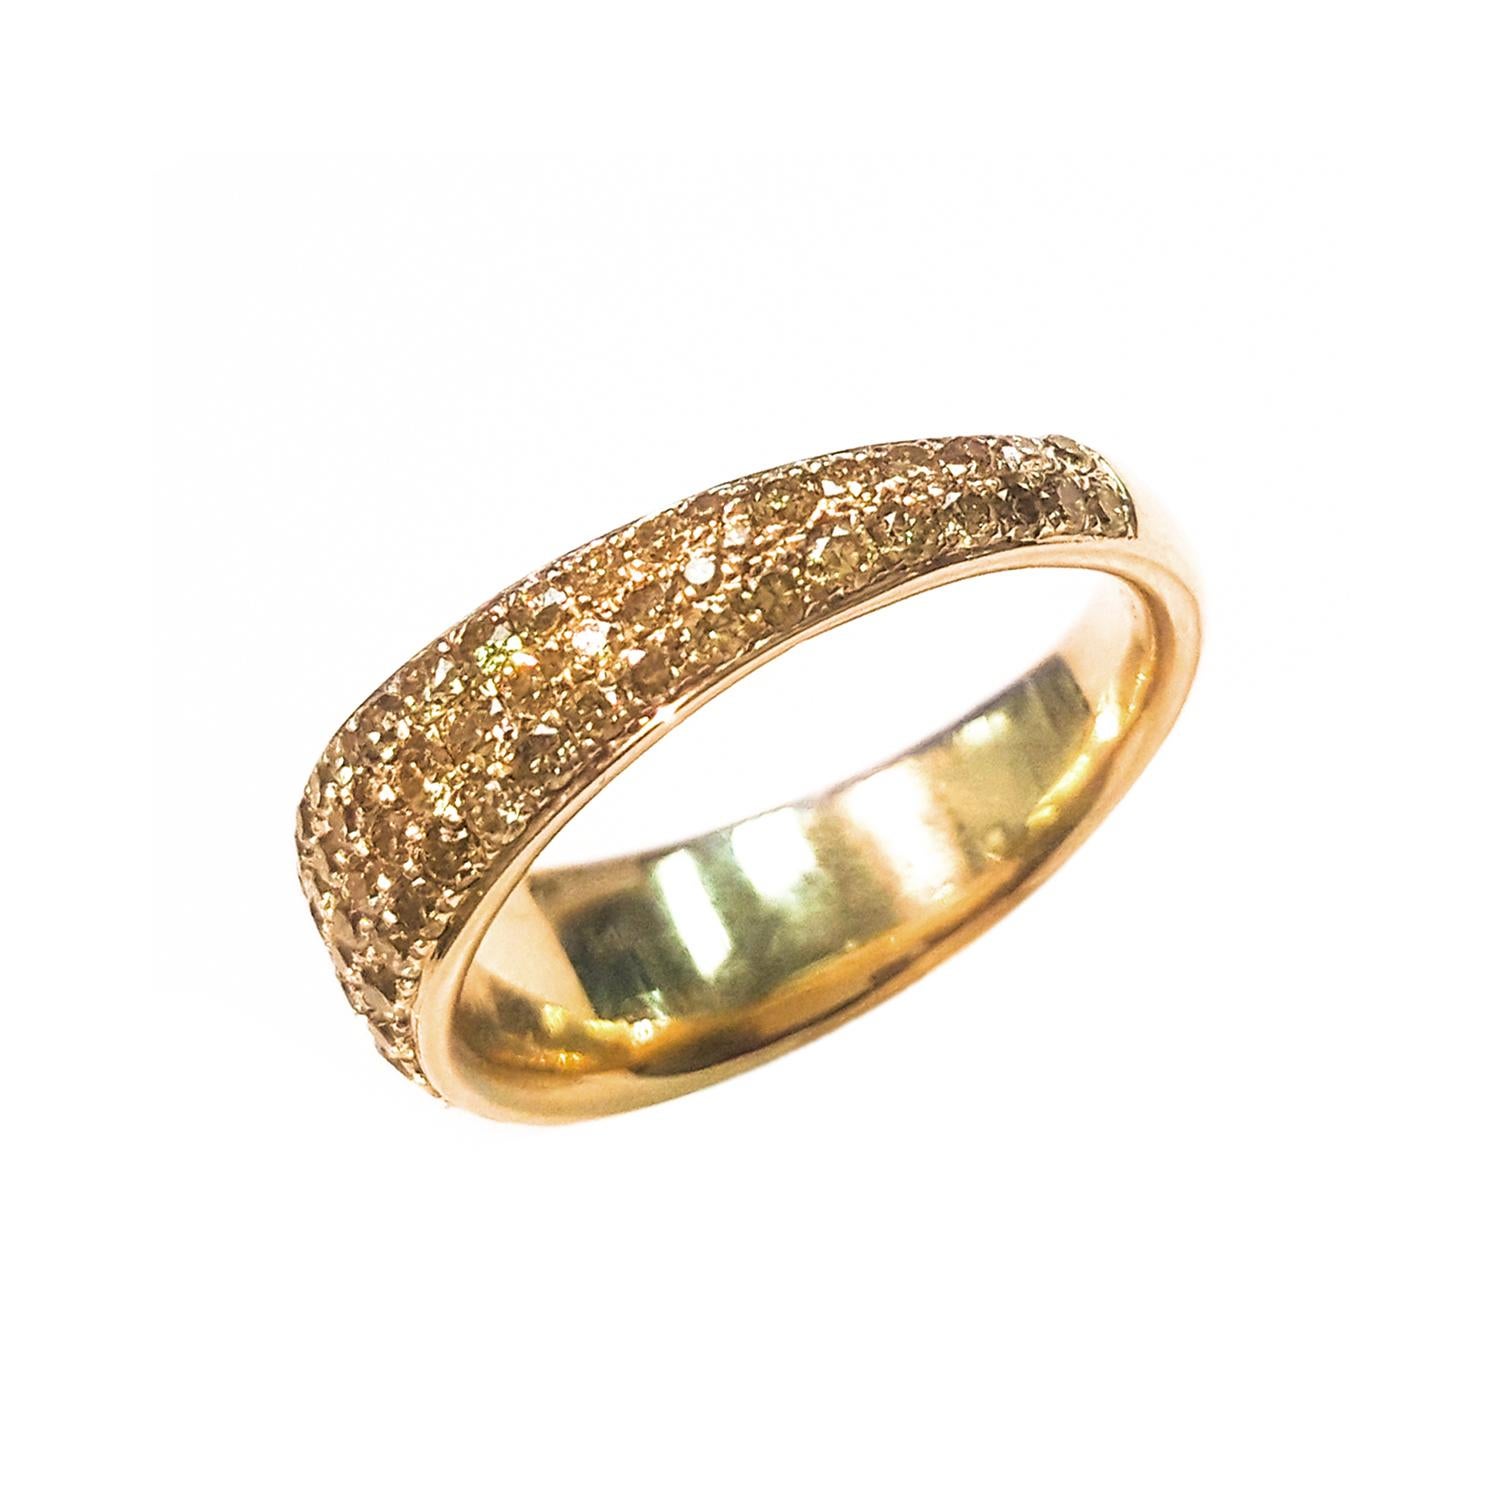 This Ladies 14k Yellow Gold and Natural Yellow Diamond Band has 0.92 carats of perfectly Matched Yellow Diamonds. Comfort Fit Band for Everyday Use